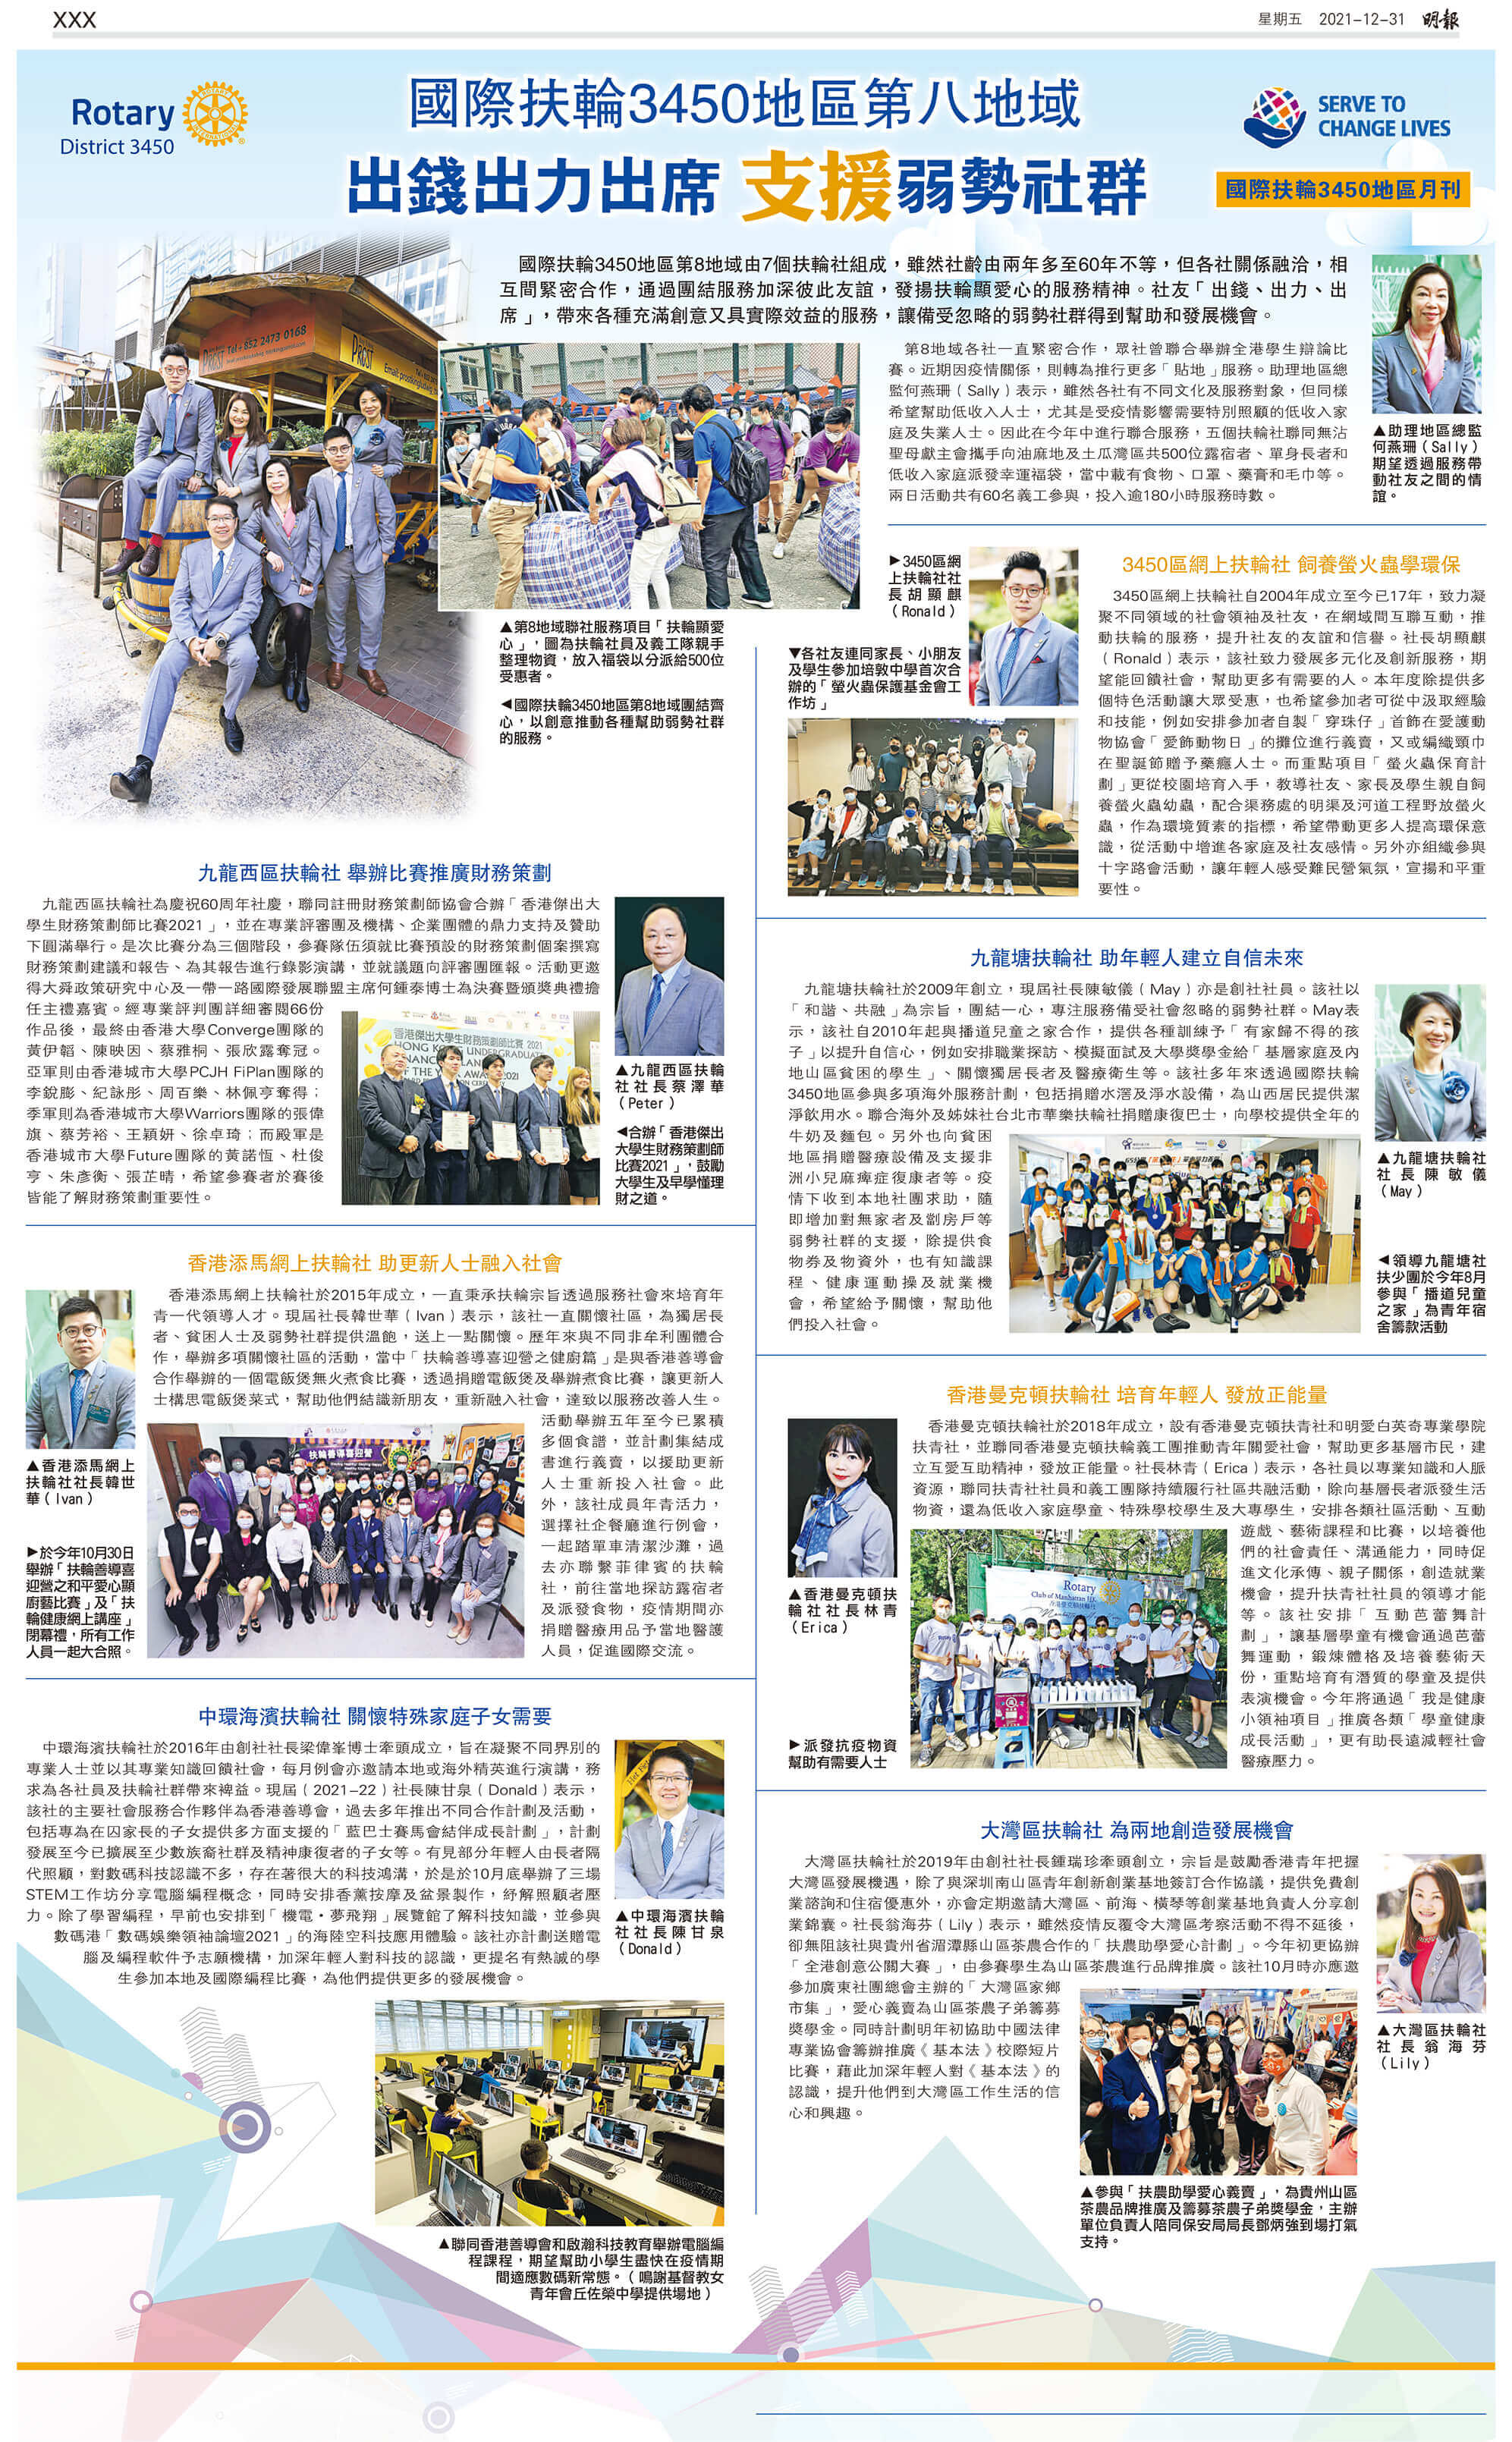 Area 8 Ming Pao interview